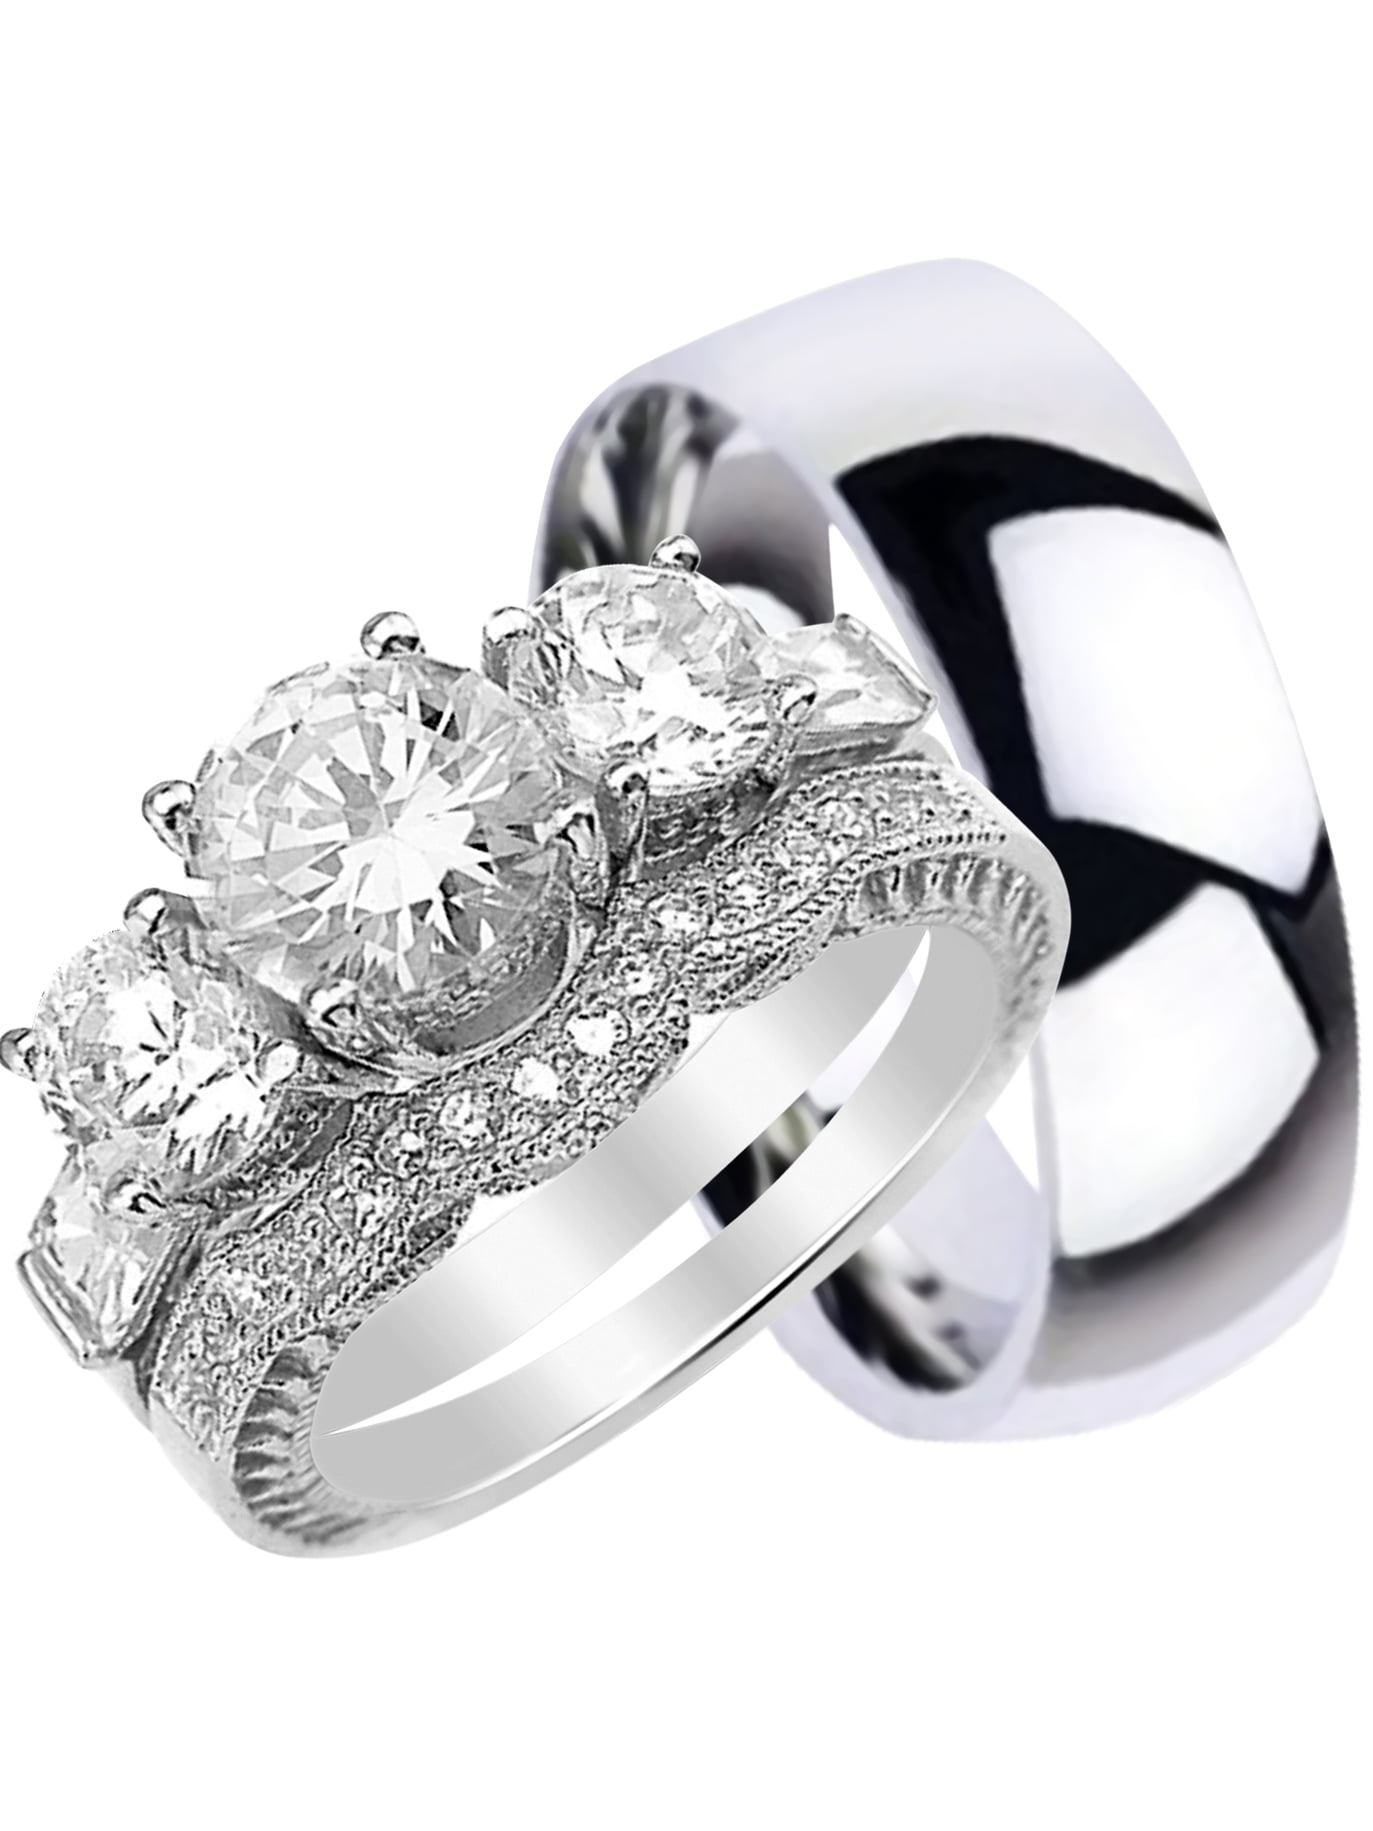 LaRaso & Co - His and Hers Wedding Ring Set Matching Trio Wedding Bands ...